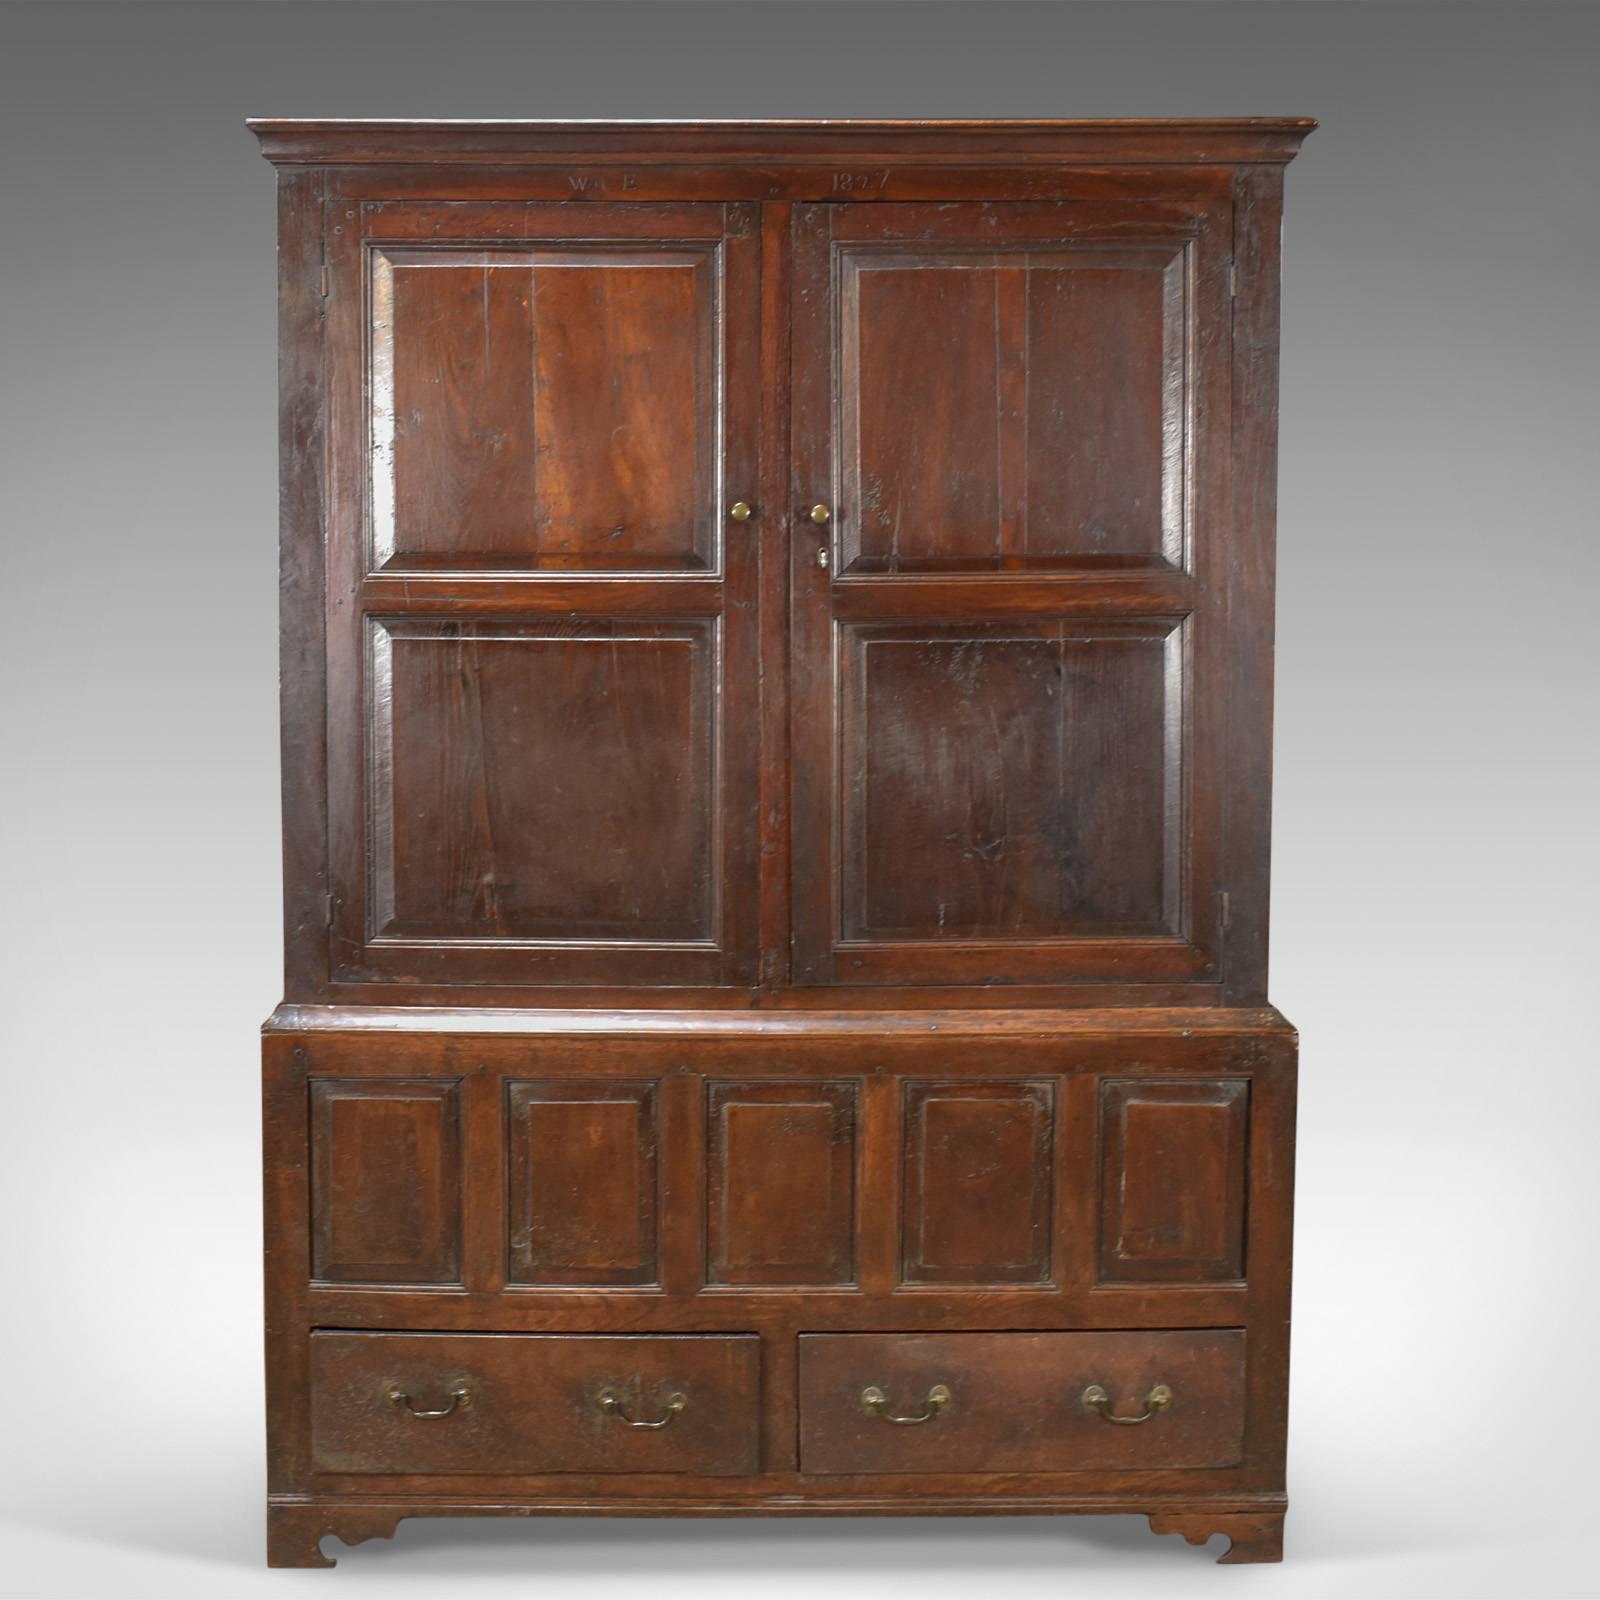 This is a late Georgian antique press cupboard, an English oak housekeeper's cabinet dating to circa 1780.

Attractive dark tones and desirable aged patina to the English oak
Appealing panelled construction standing upon spurred bracket